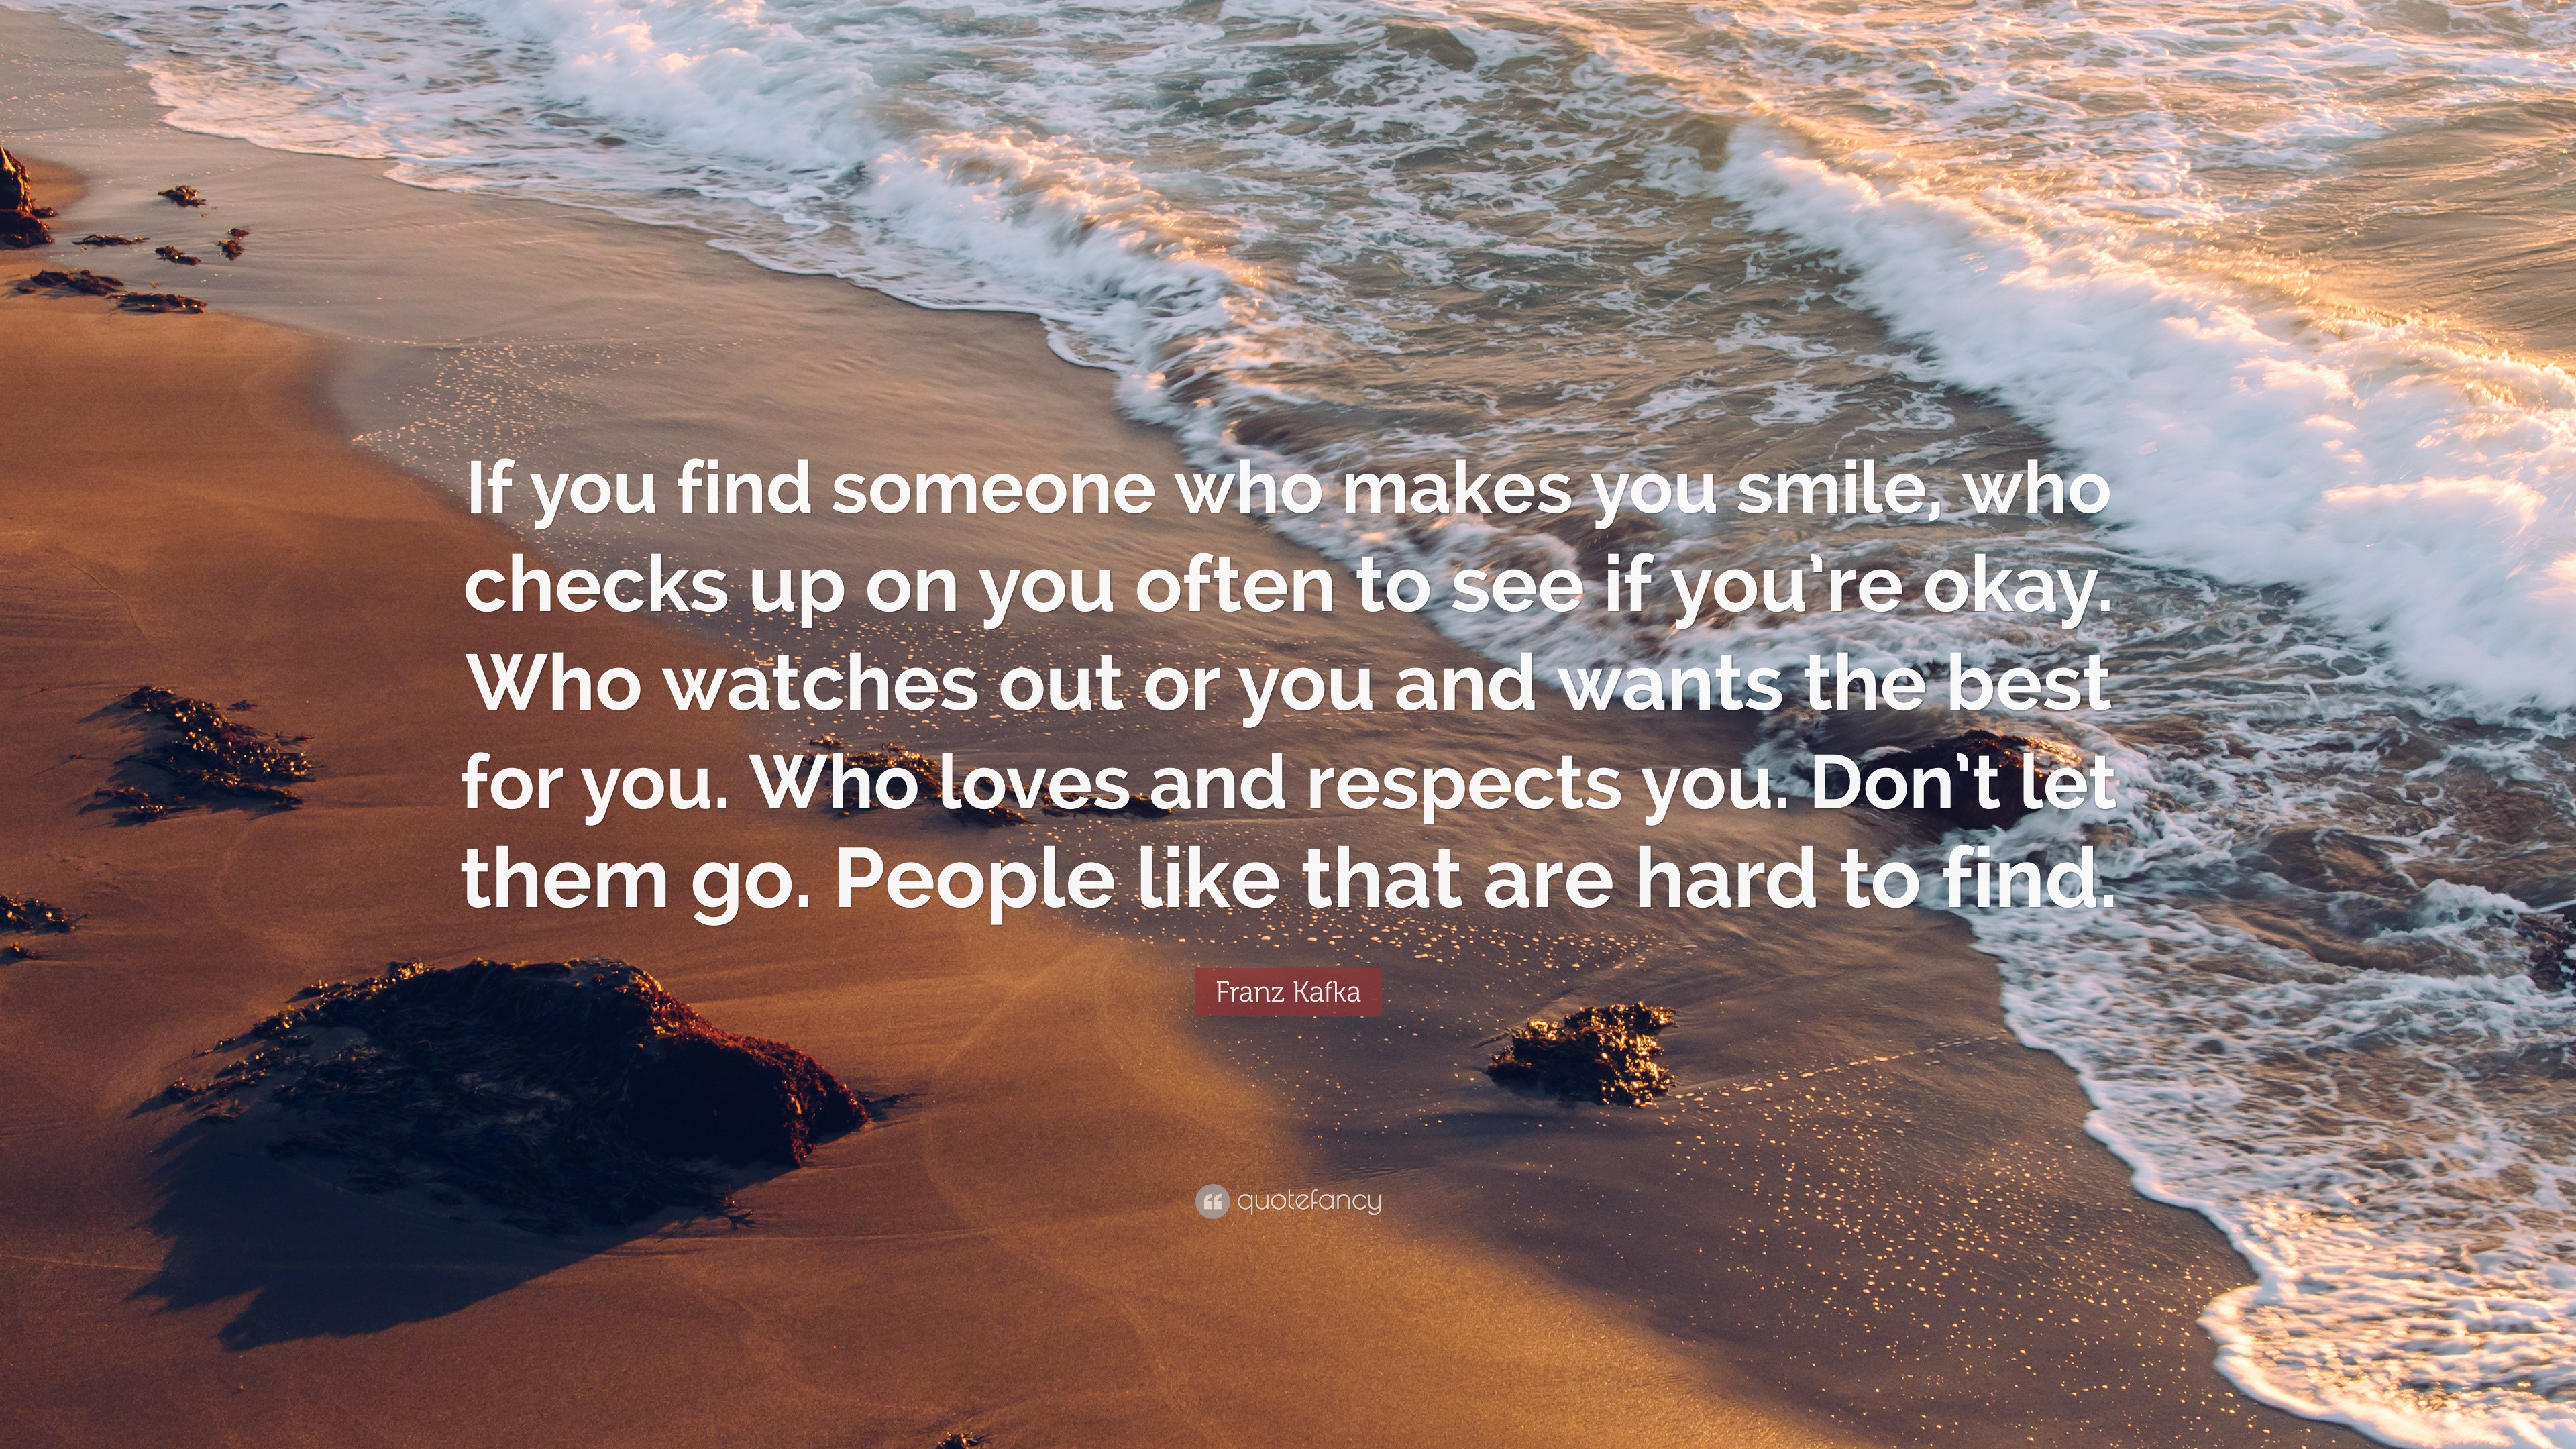 Franz Kafka Quote: “If you find someone who makes you smile, who checks